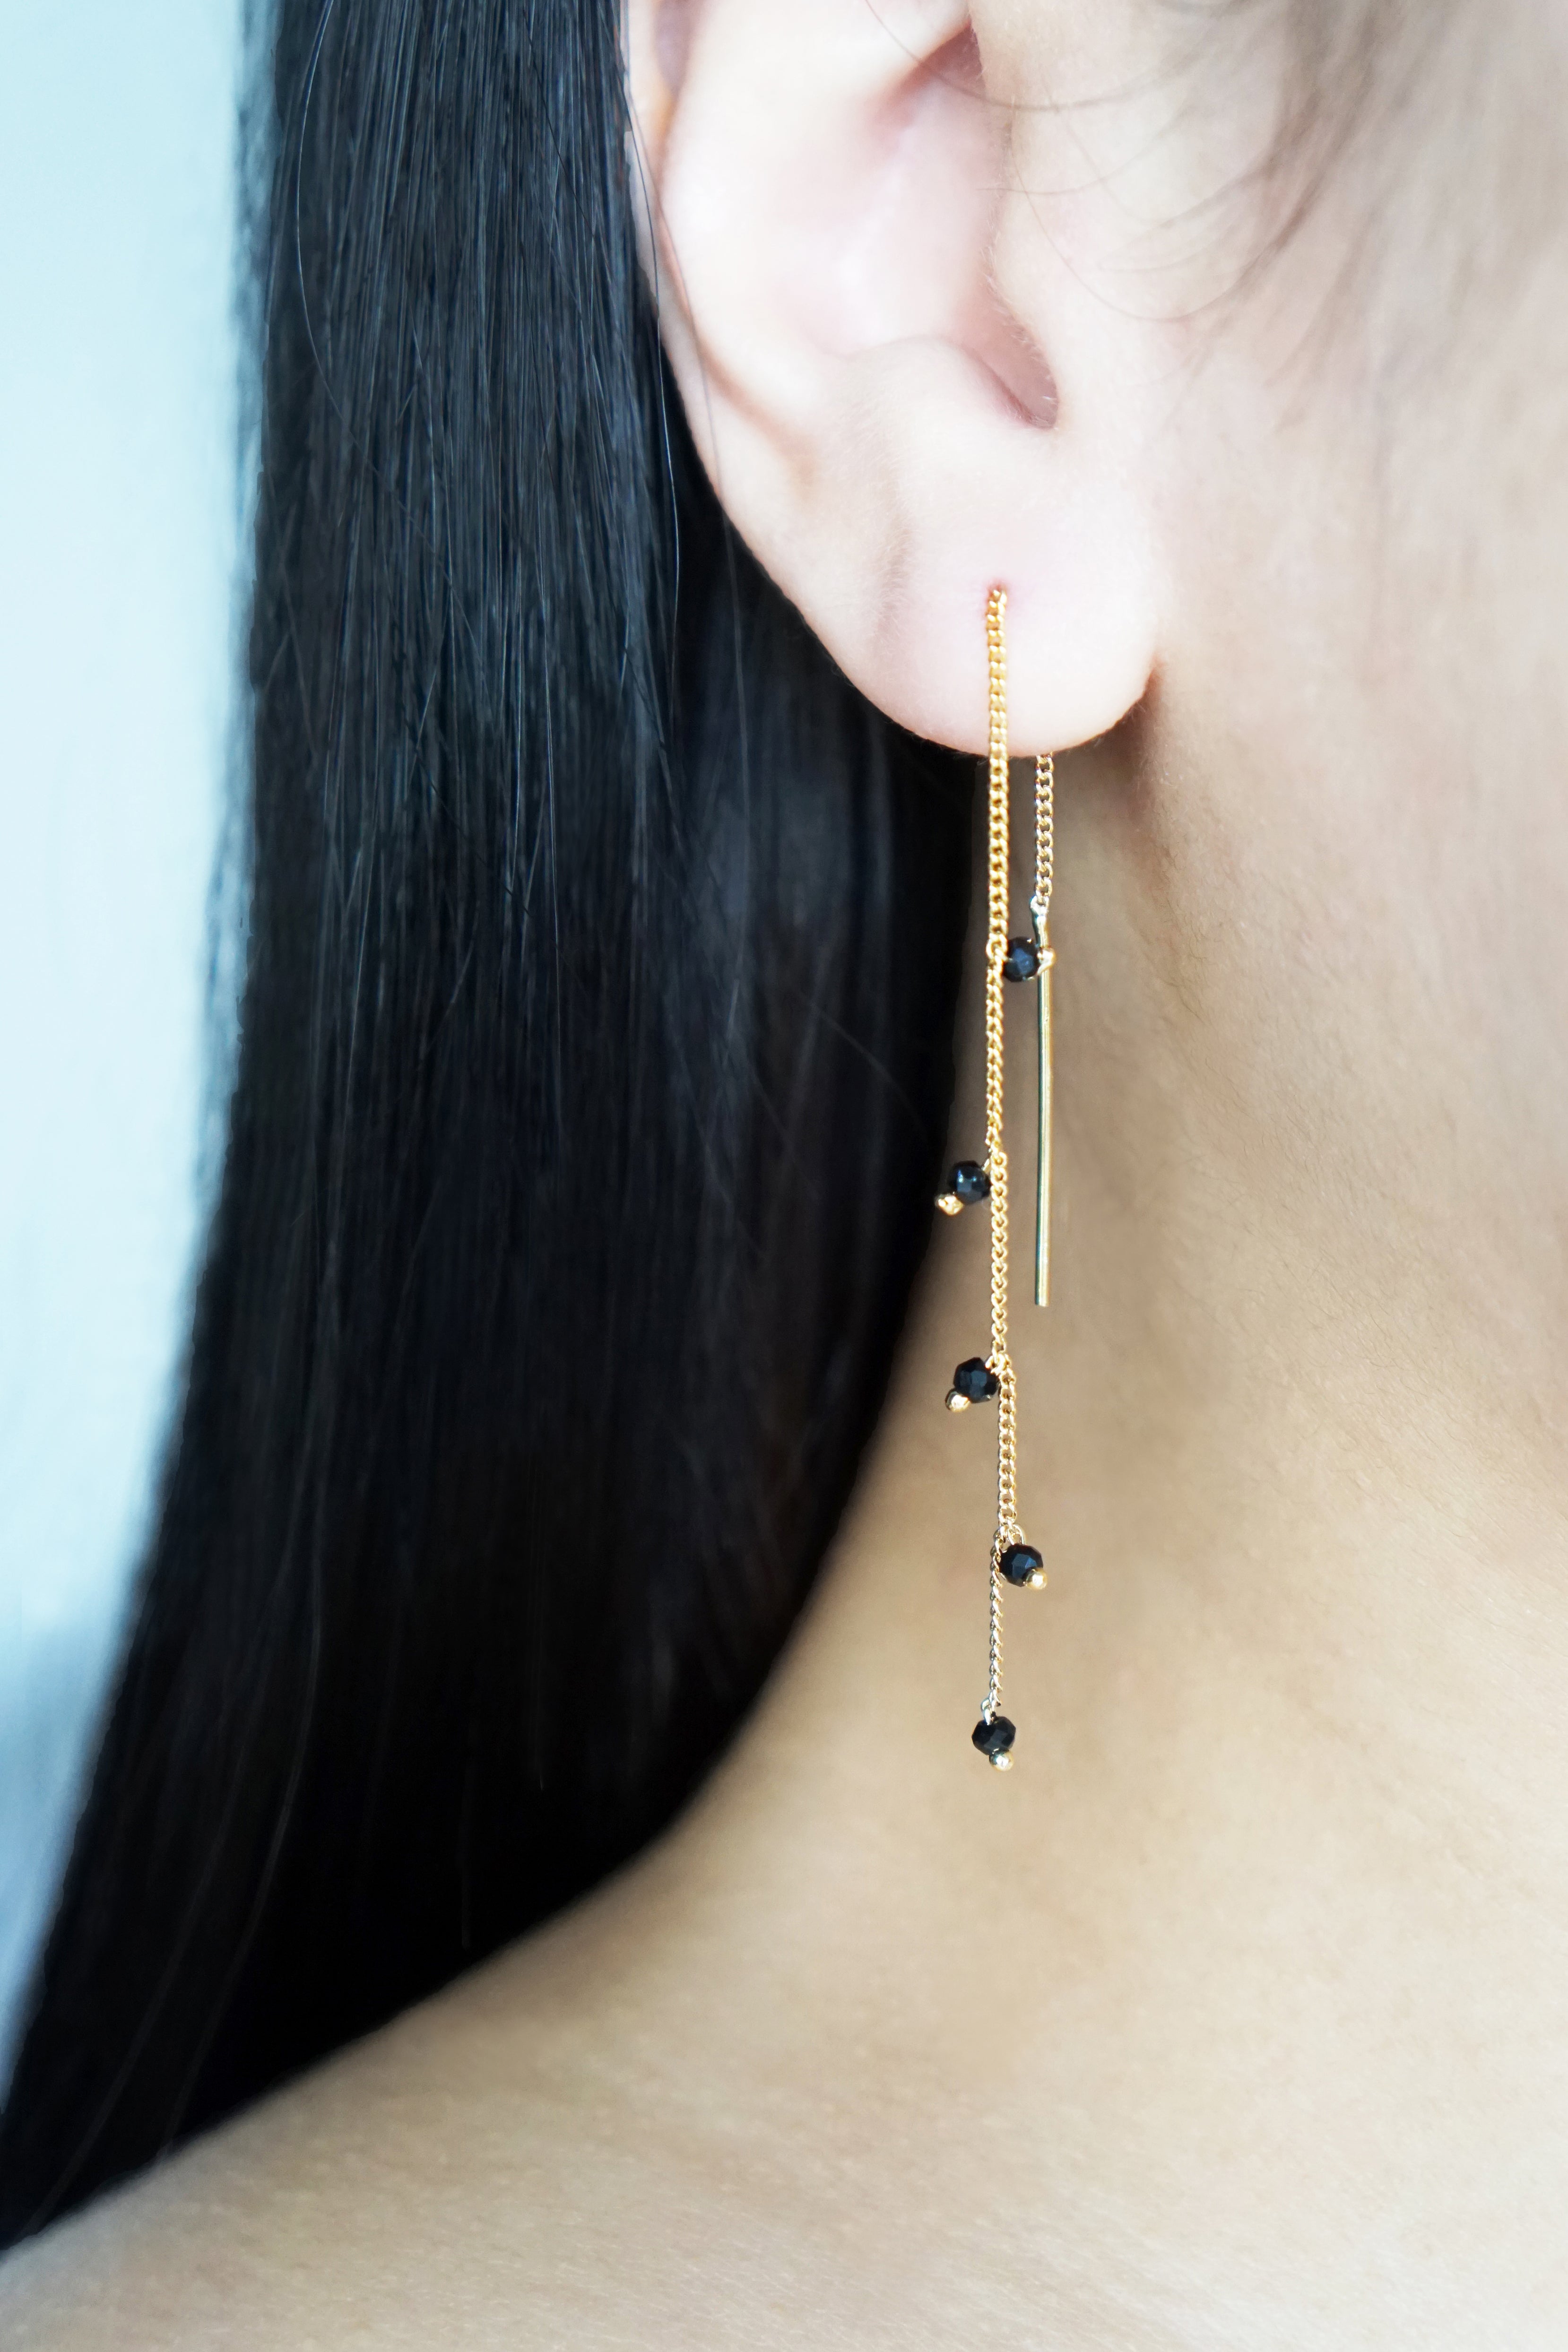 Wisteria Ear Threaders in Rose Gold - Black